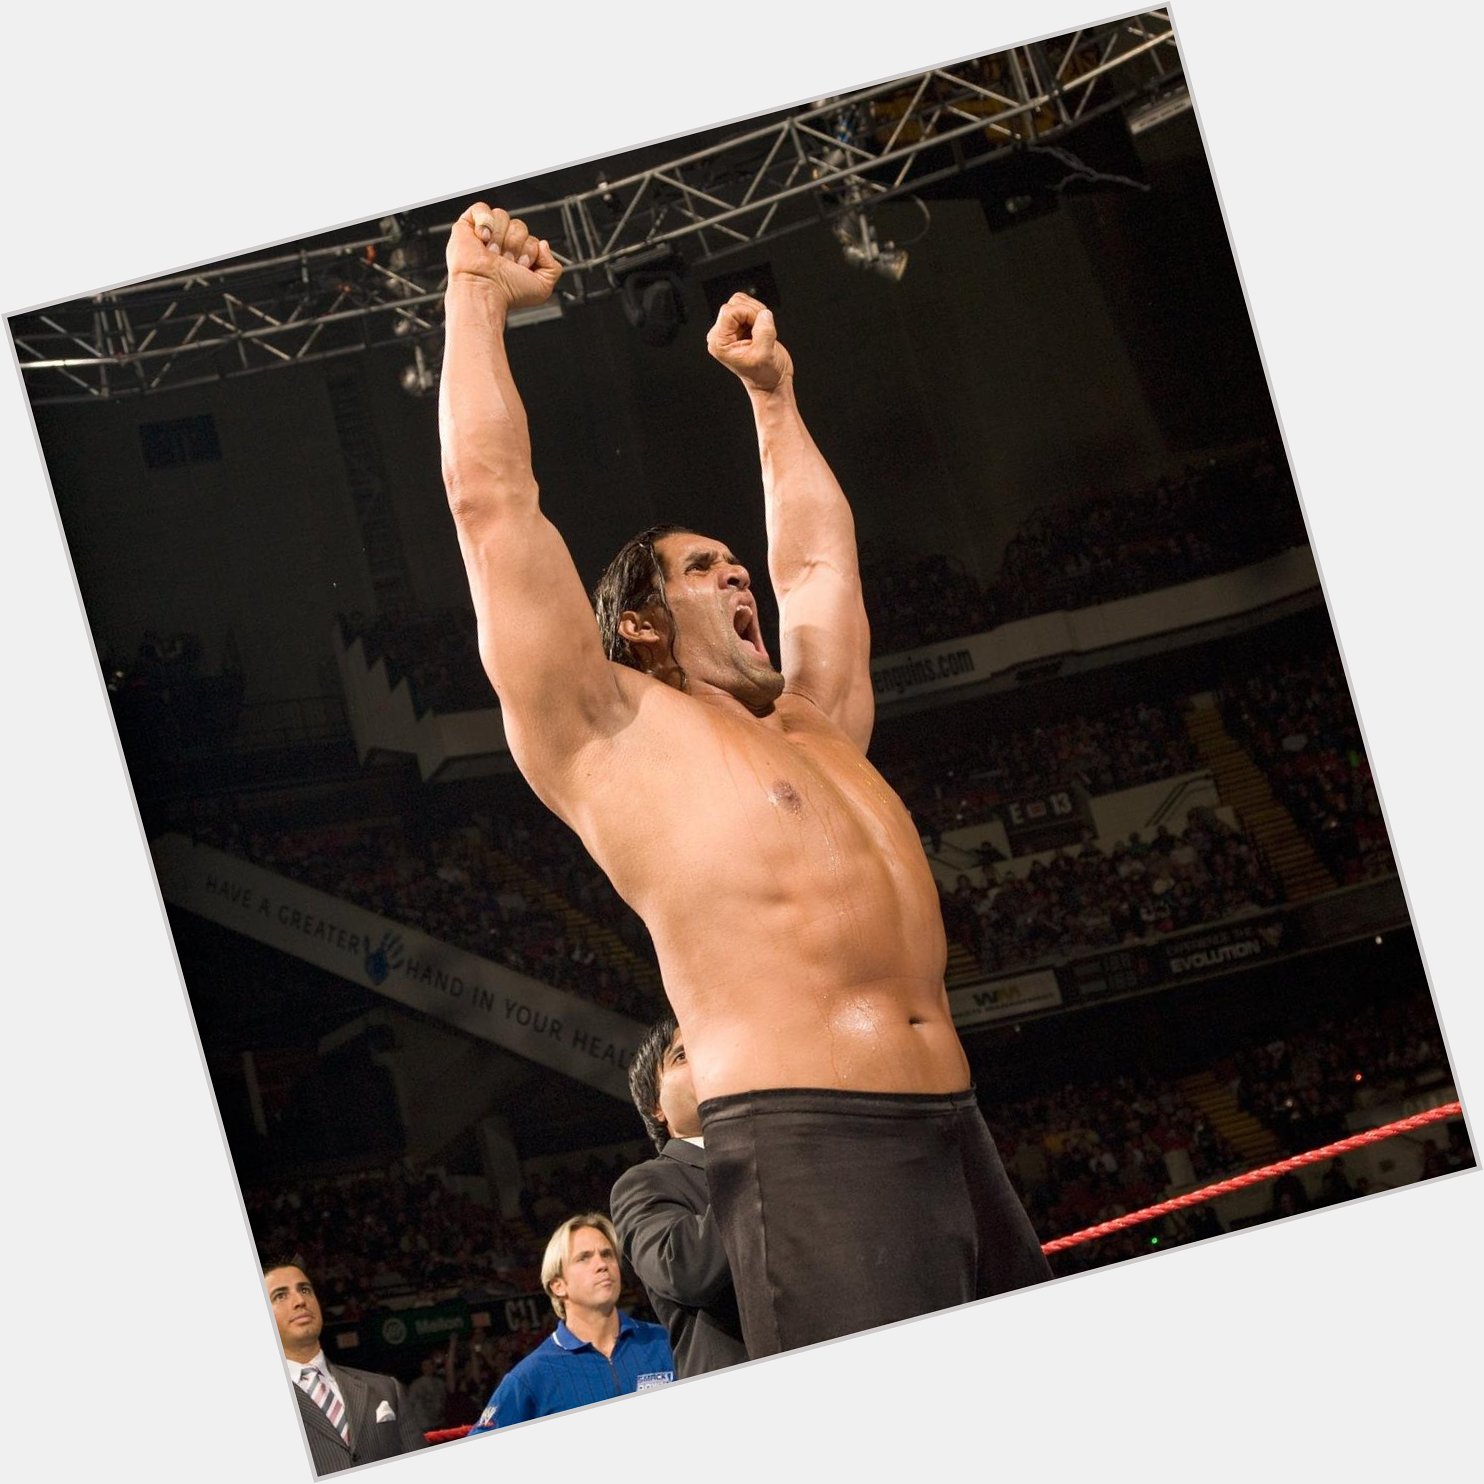 Happy 48th Birthday to The Great Khali! The Biggest Wrestling Star to come out of India and a future Hall of Famer! 